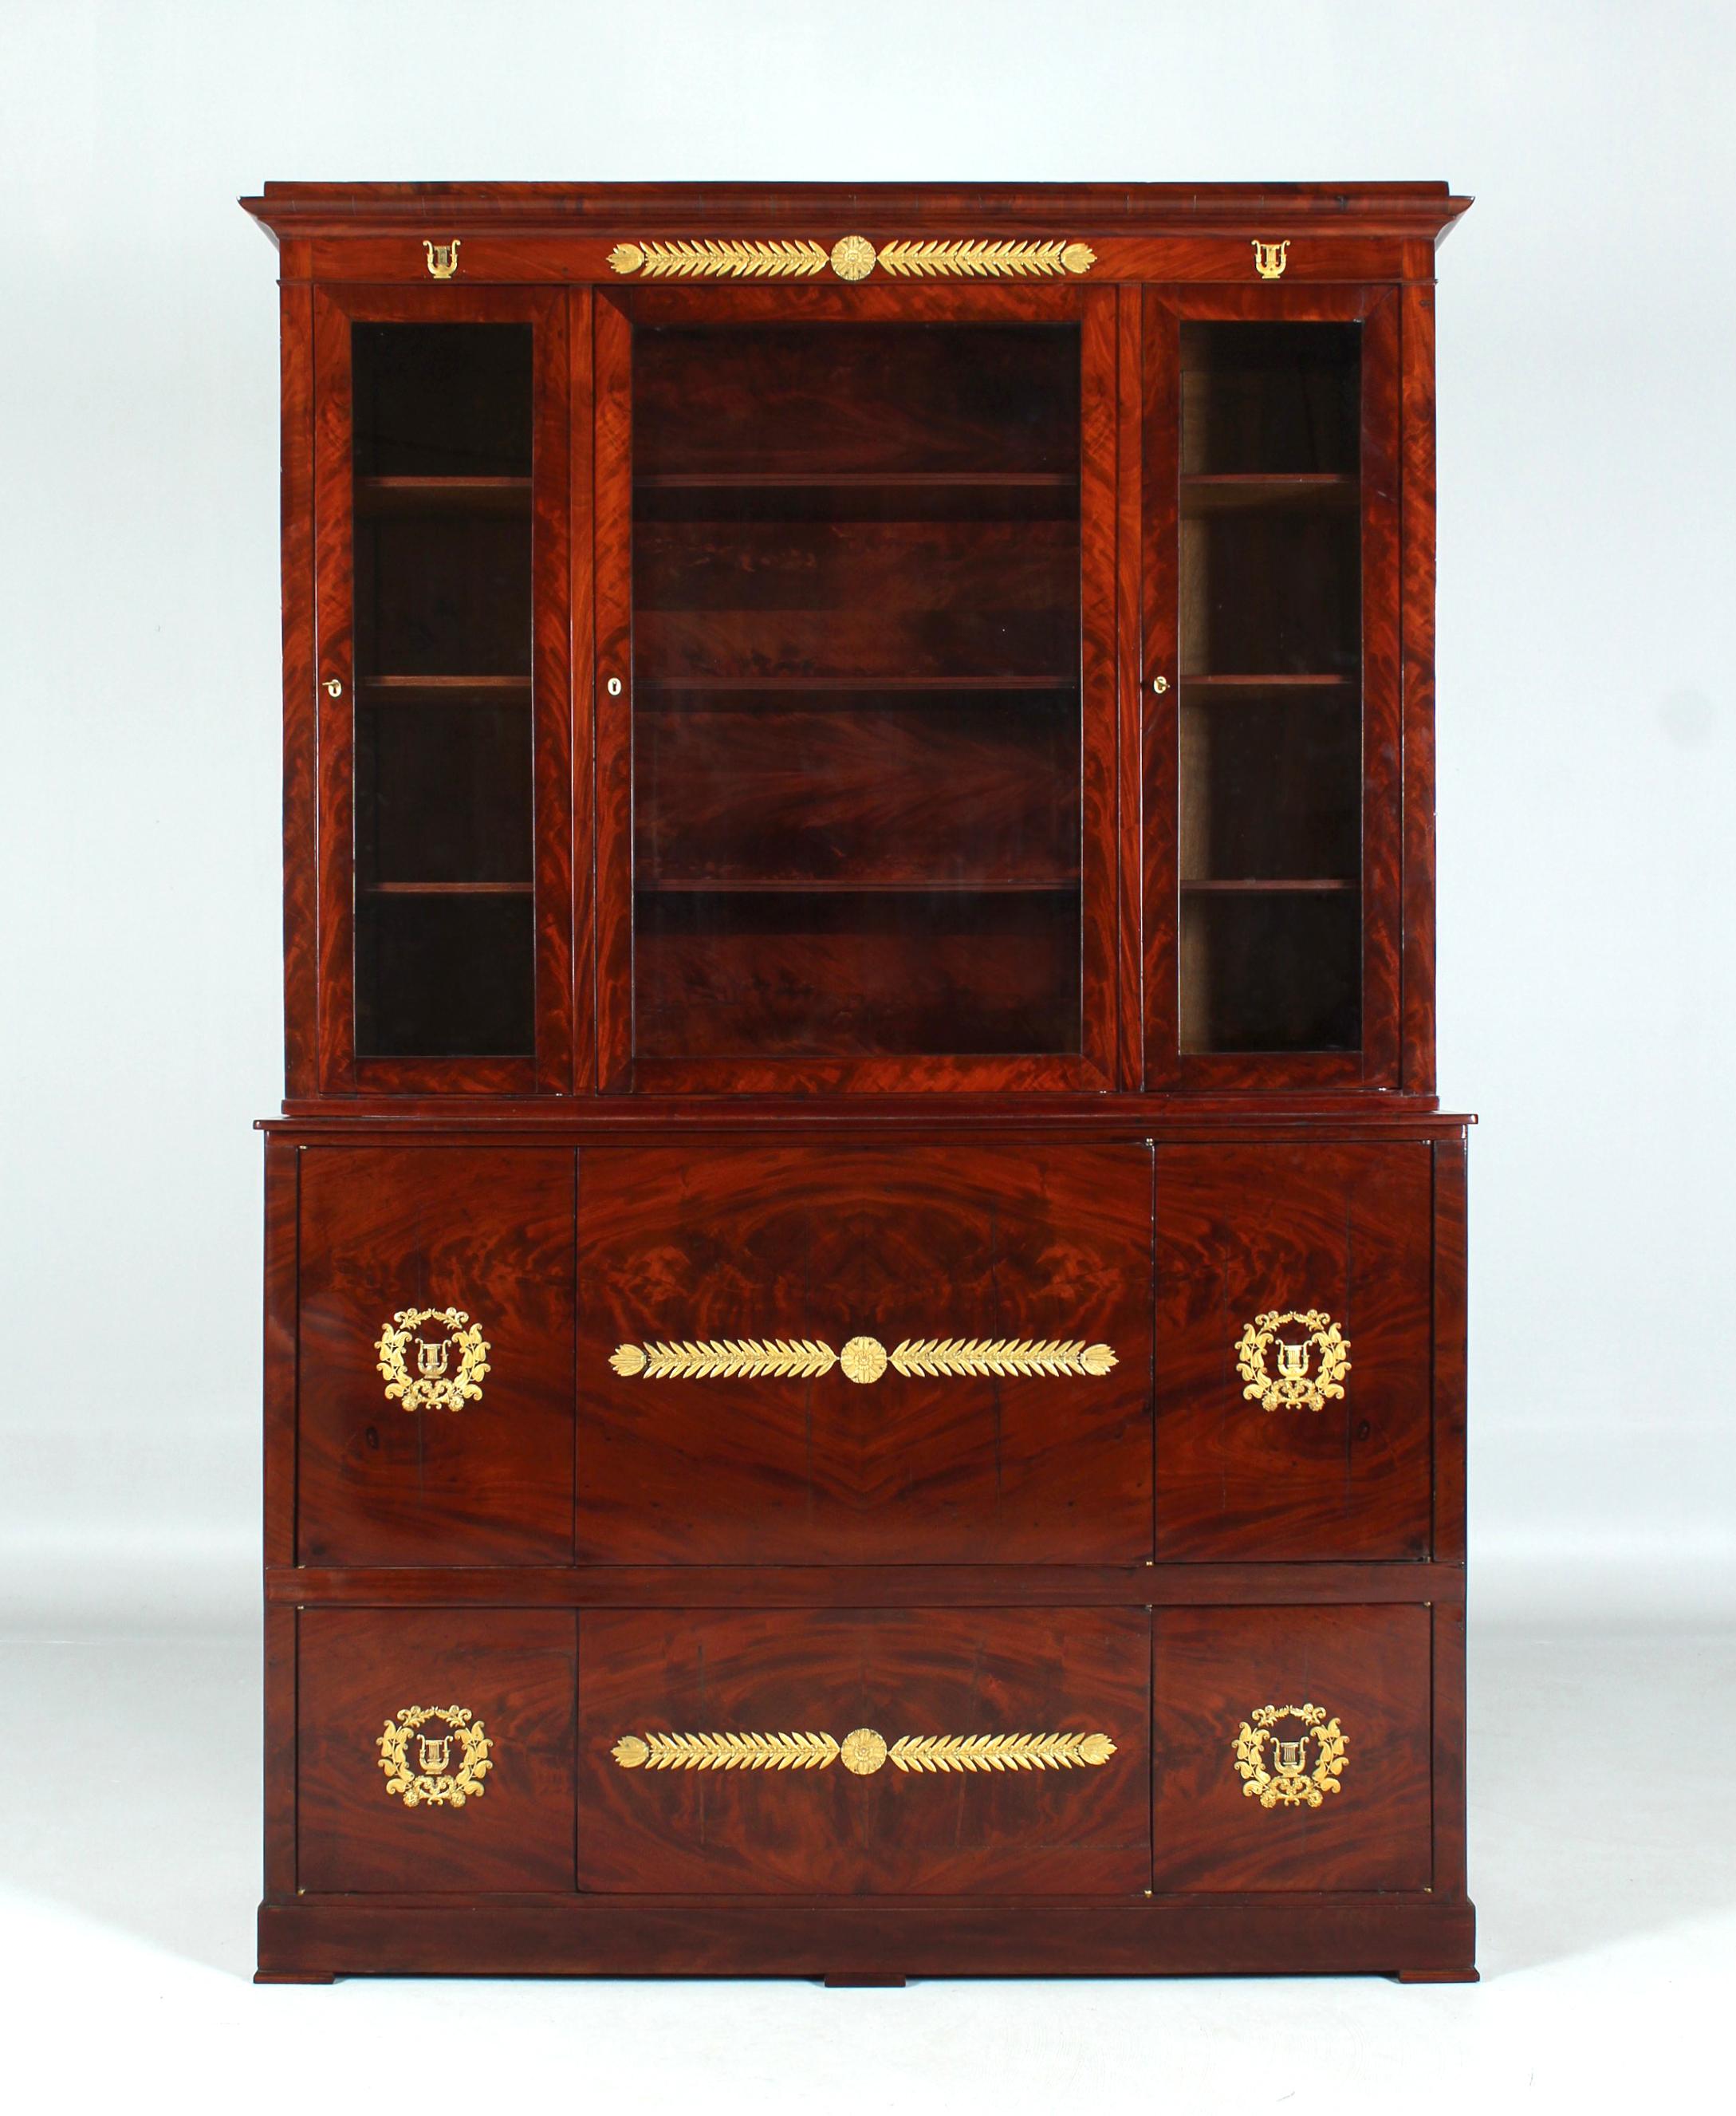 Empire bookcase with safe deposit box

France
Mahogany
Empire around 1820

Dimensions: H x W x D: 227 x 154 x 49 cm

Description:
Impressive Empire centrepiece with neatly laid Cuban mahogany and fine gilded fittings.

The substructure, standing on